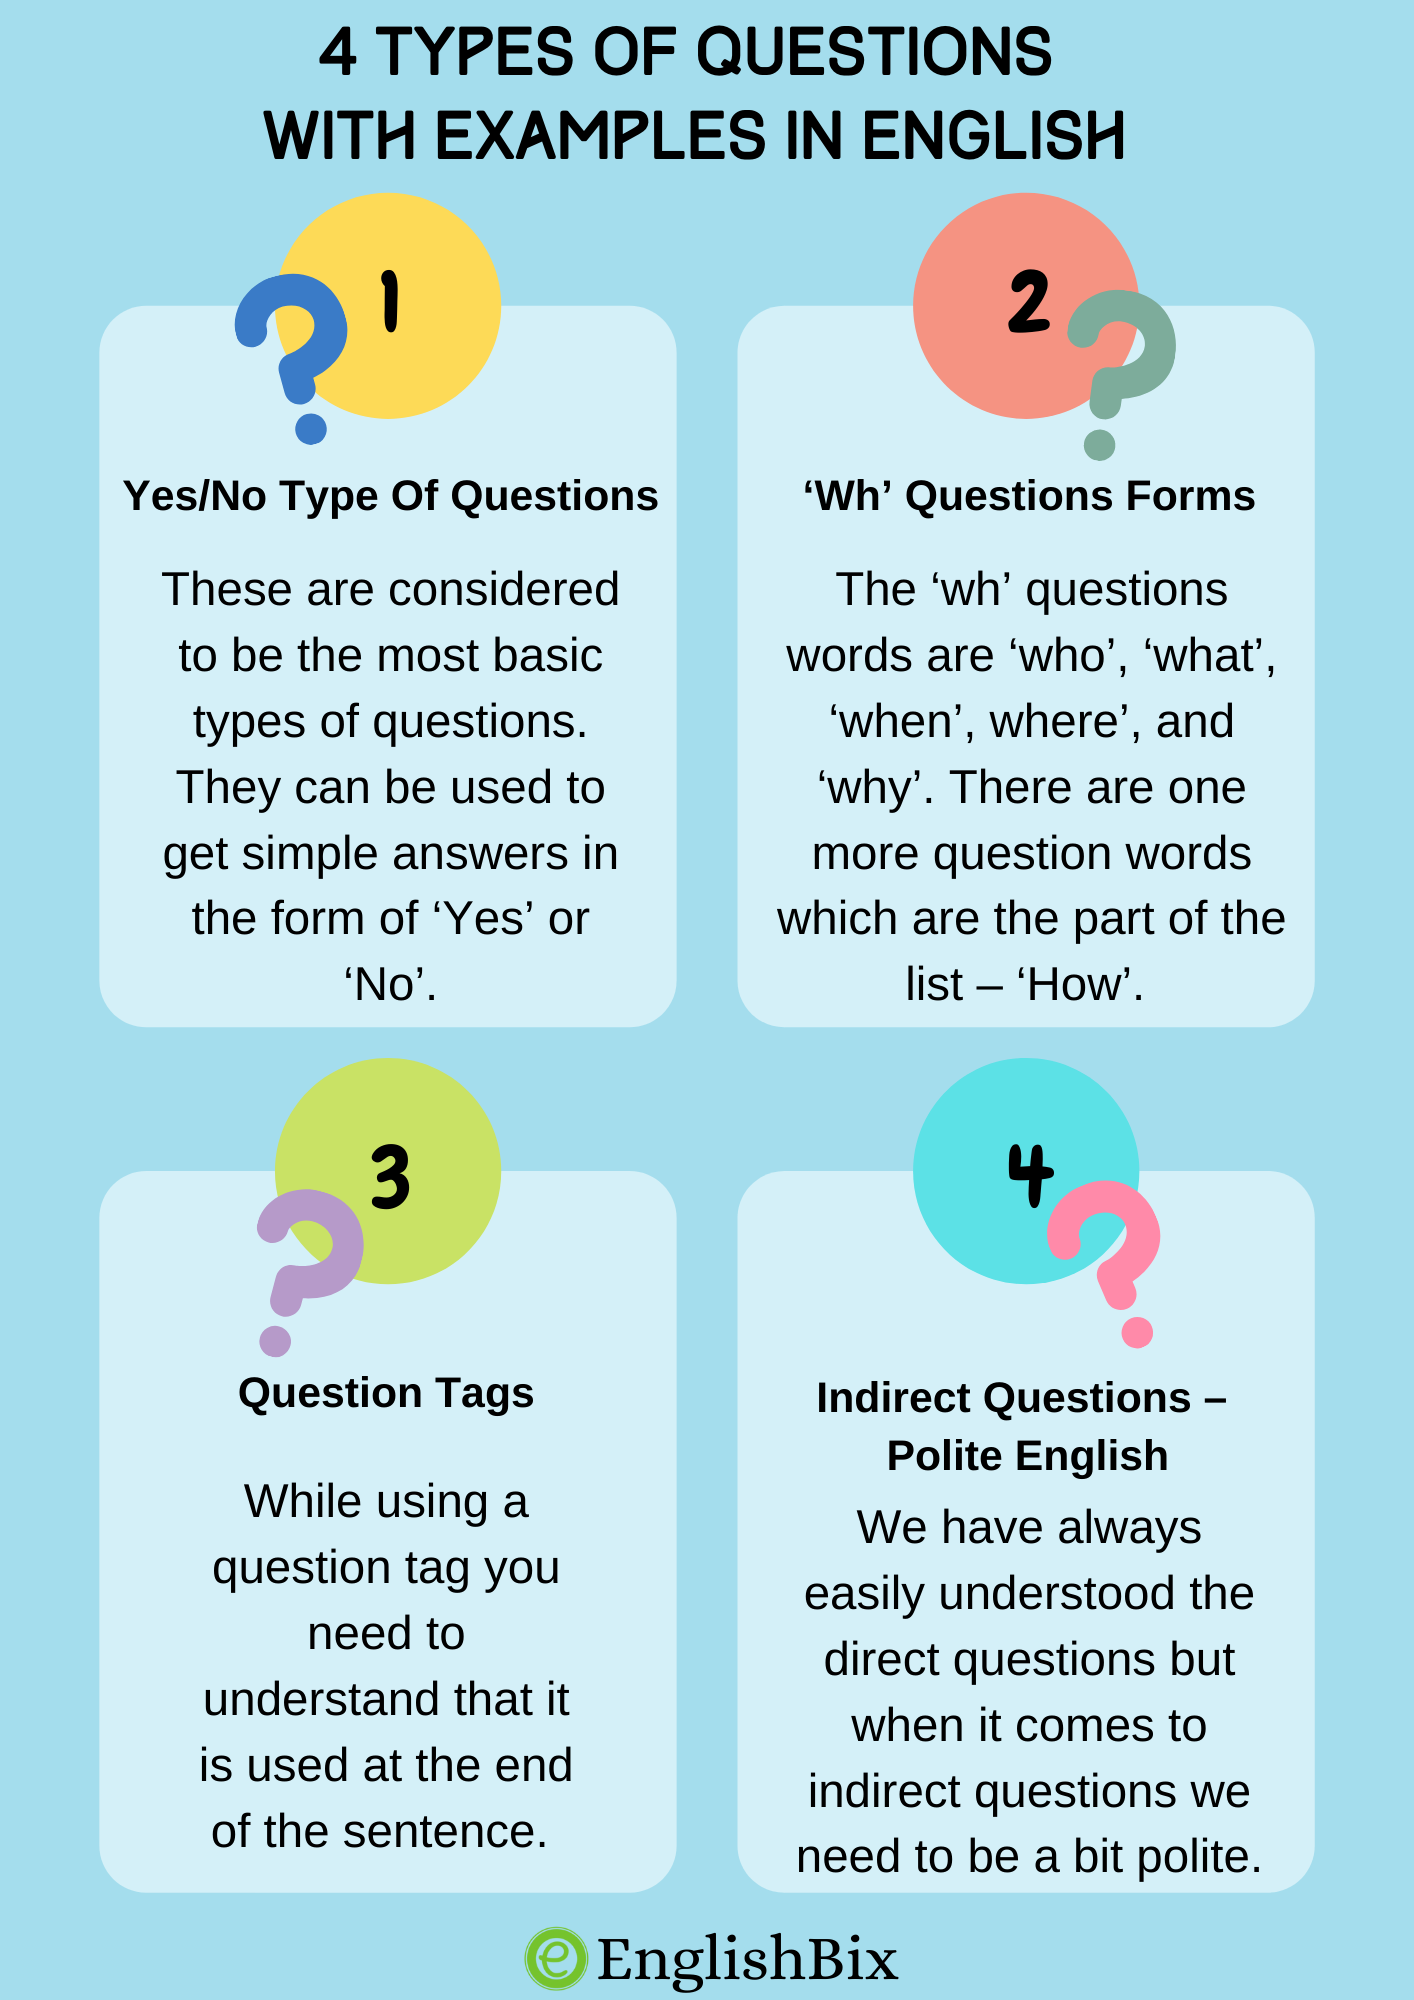 4-types-of-questions-with-examples-in-english-englishbix